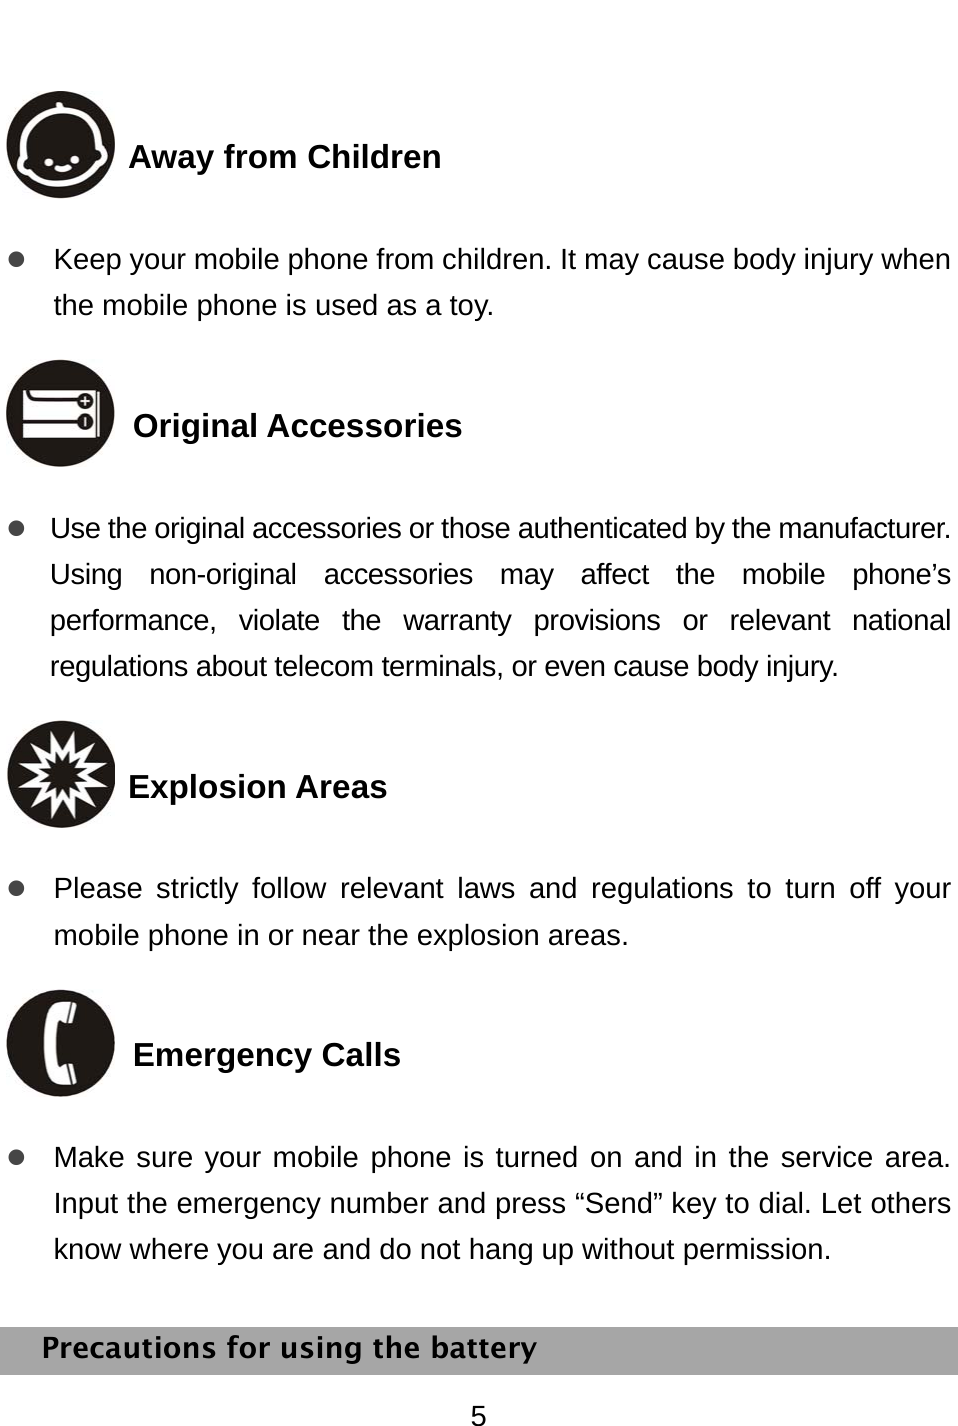  5  Away from Children z Keep your mobile phone from children. It may cause body injury when the mobile phone is used as a toy.  Original Accessories z Use the original accessories or those authenticated by the manufacturer. Using non-original accessories may affect the mobile phone’s performance, violate the warranty provisions or relevant national regulations about telecom terminals, or even cause body injury.      Explosion Areas z Please strictly follow relevant laws and regulations to turn off your mobile phone in or near the explosion areas.    Emergency Calls z Make sure your mobile phone is turned on and in the service area. Input the emergency number and press “Send” key to dial. Let others know where you are and do not hang up without permission. Precautions for using the battery 